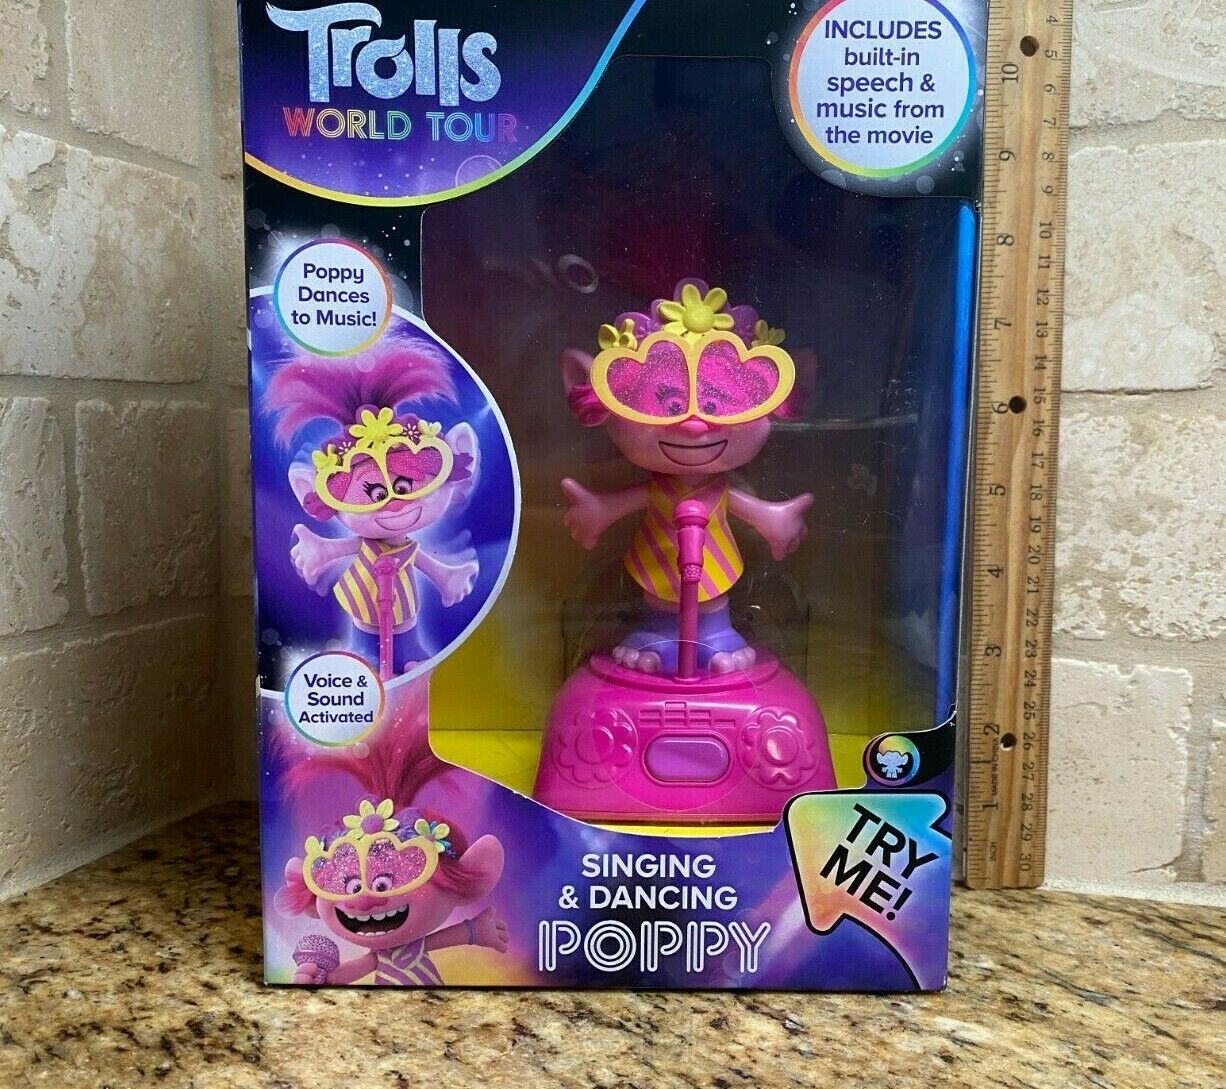 New Dreamworks Trolls World Tour Singing & Dancing Poppy Voice & Sound Activated